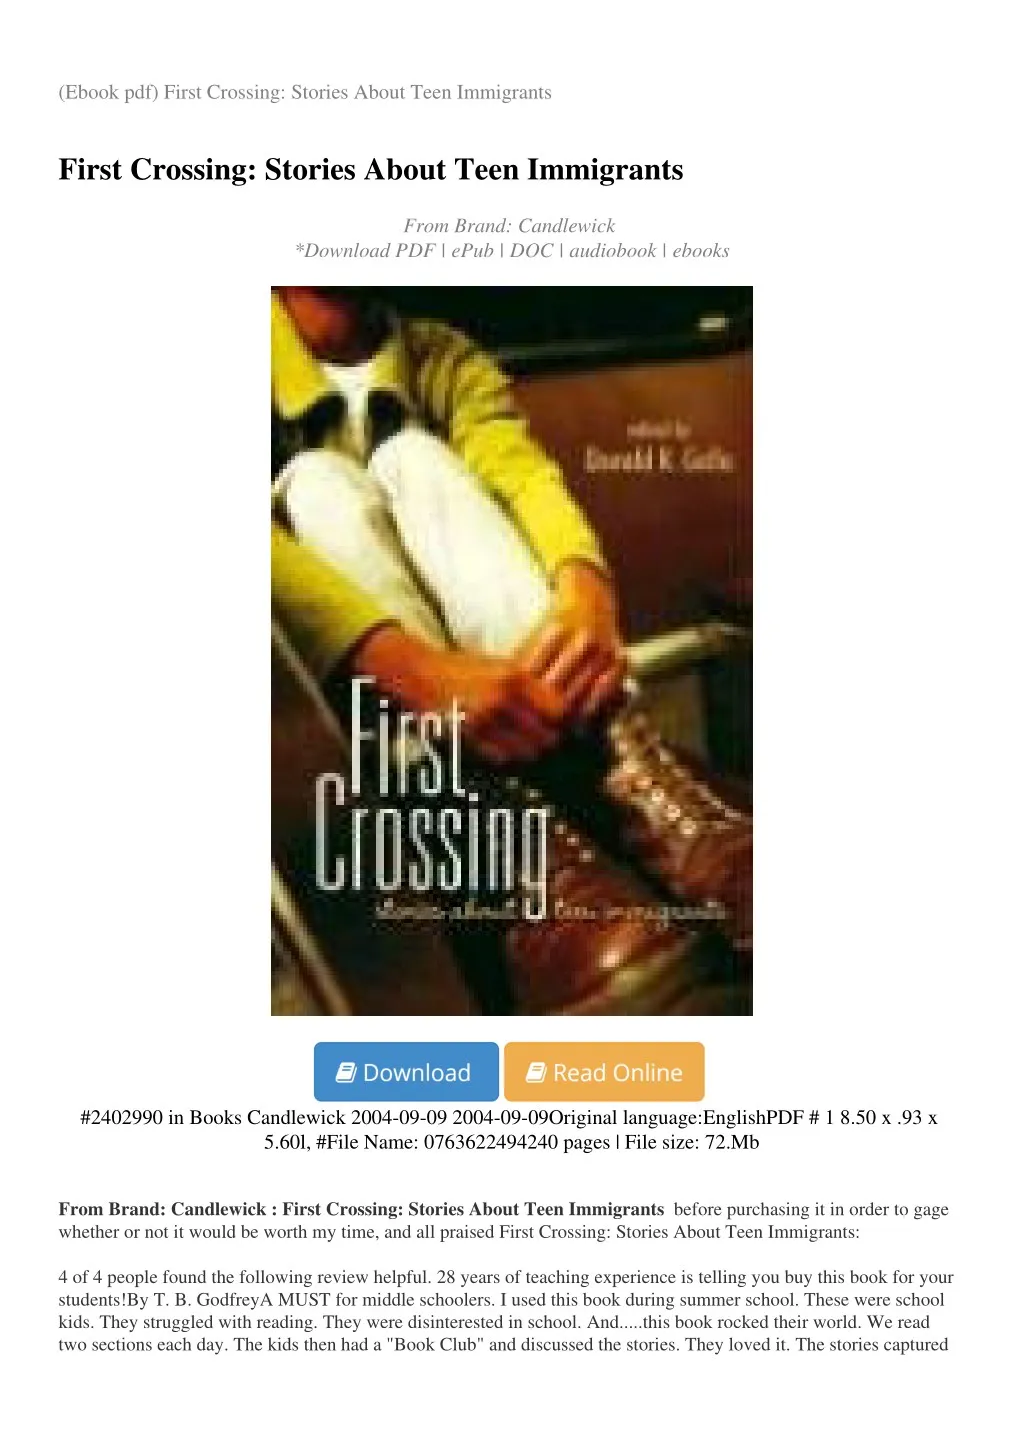 ebook pdf first crossing stories about teen